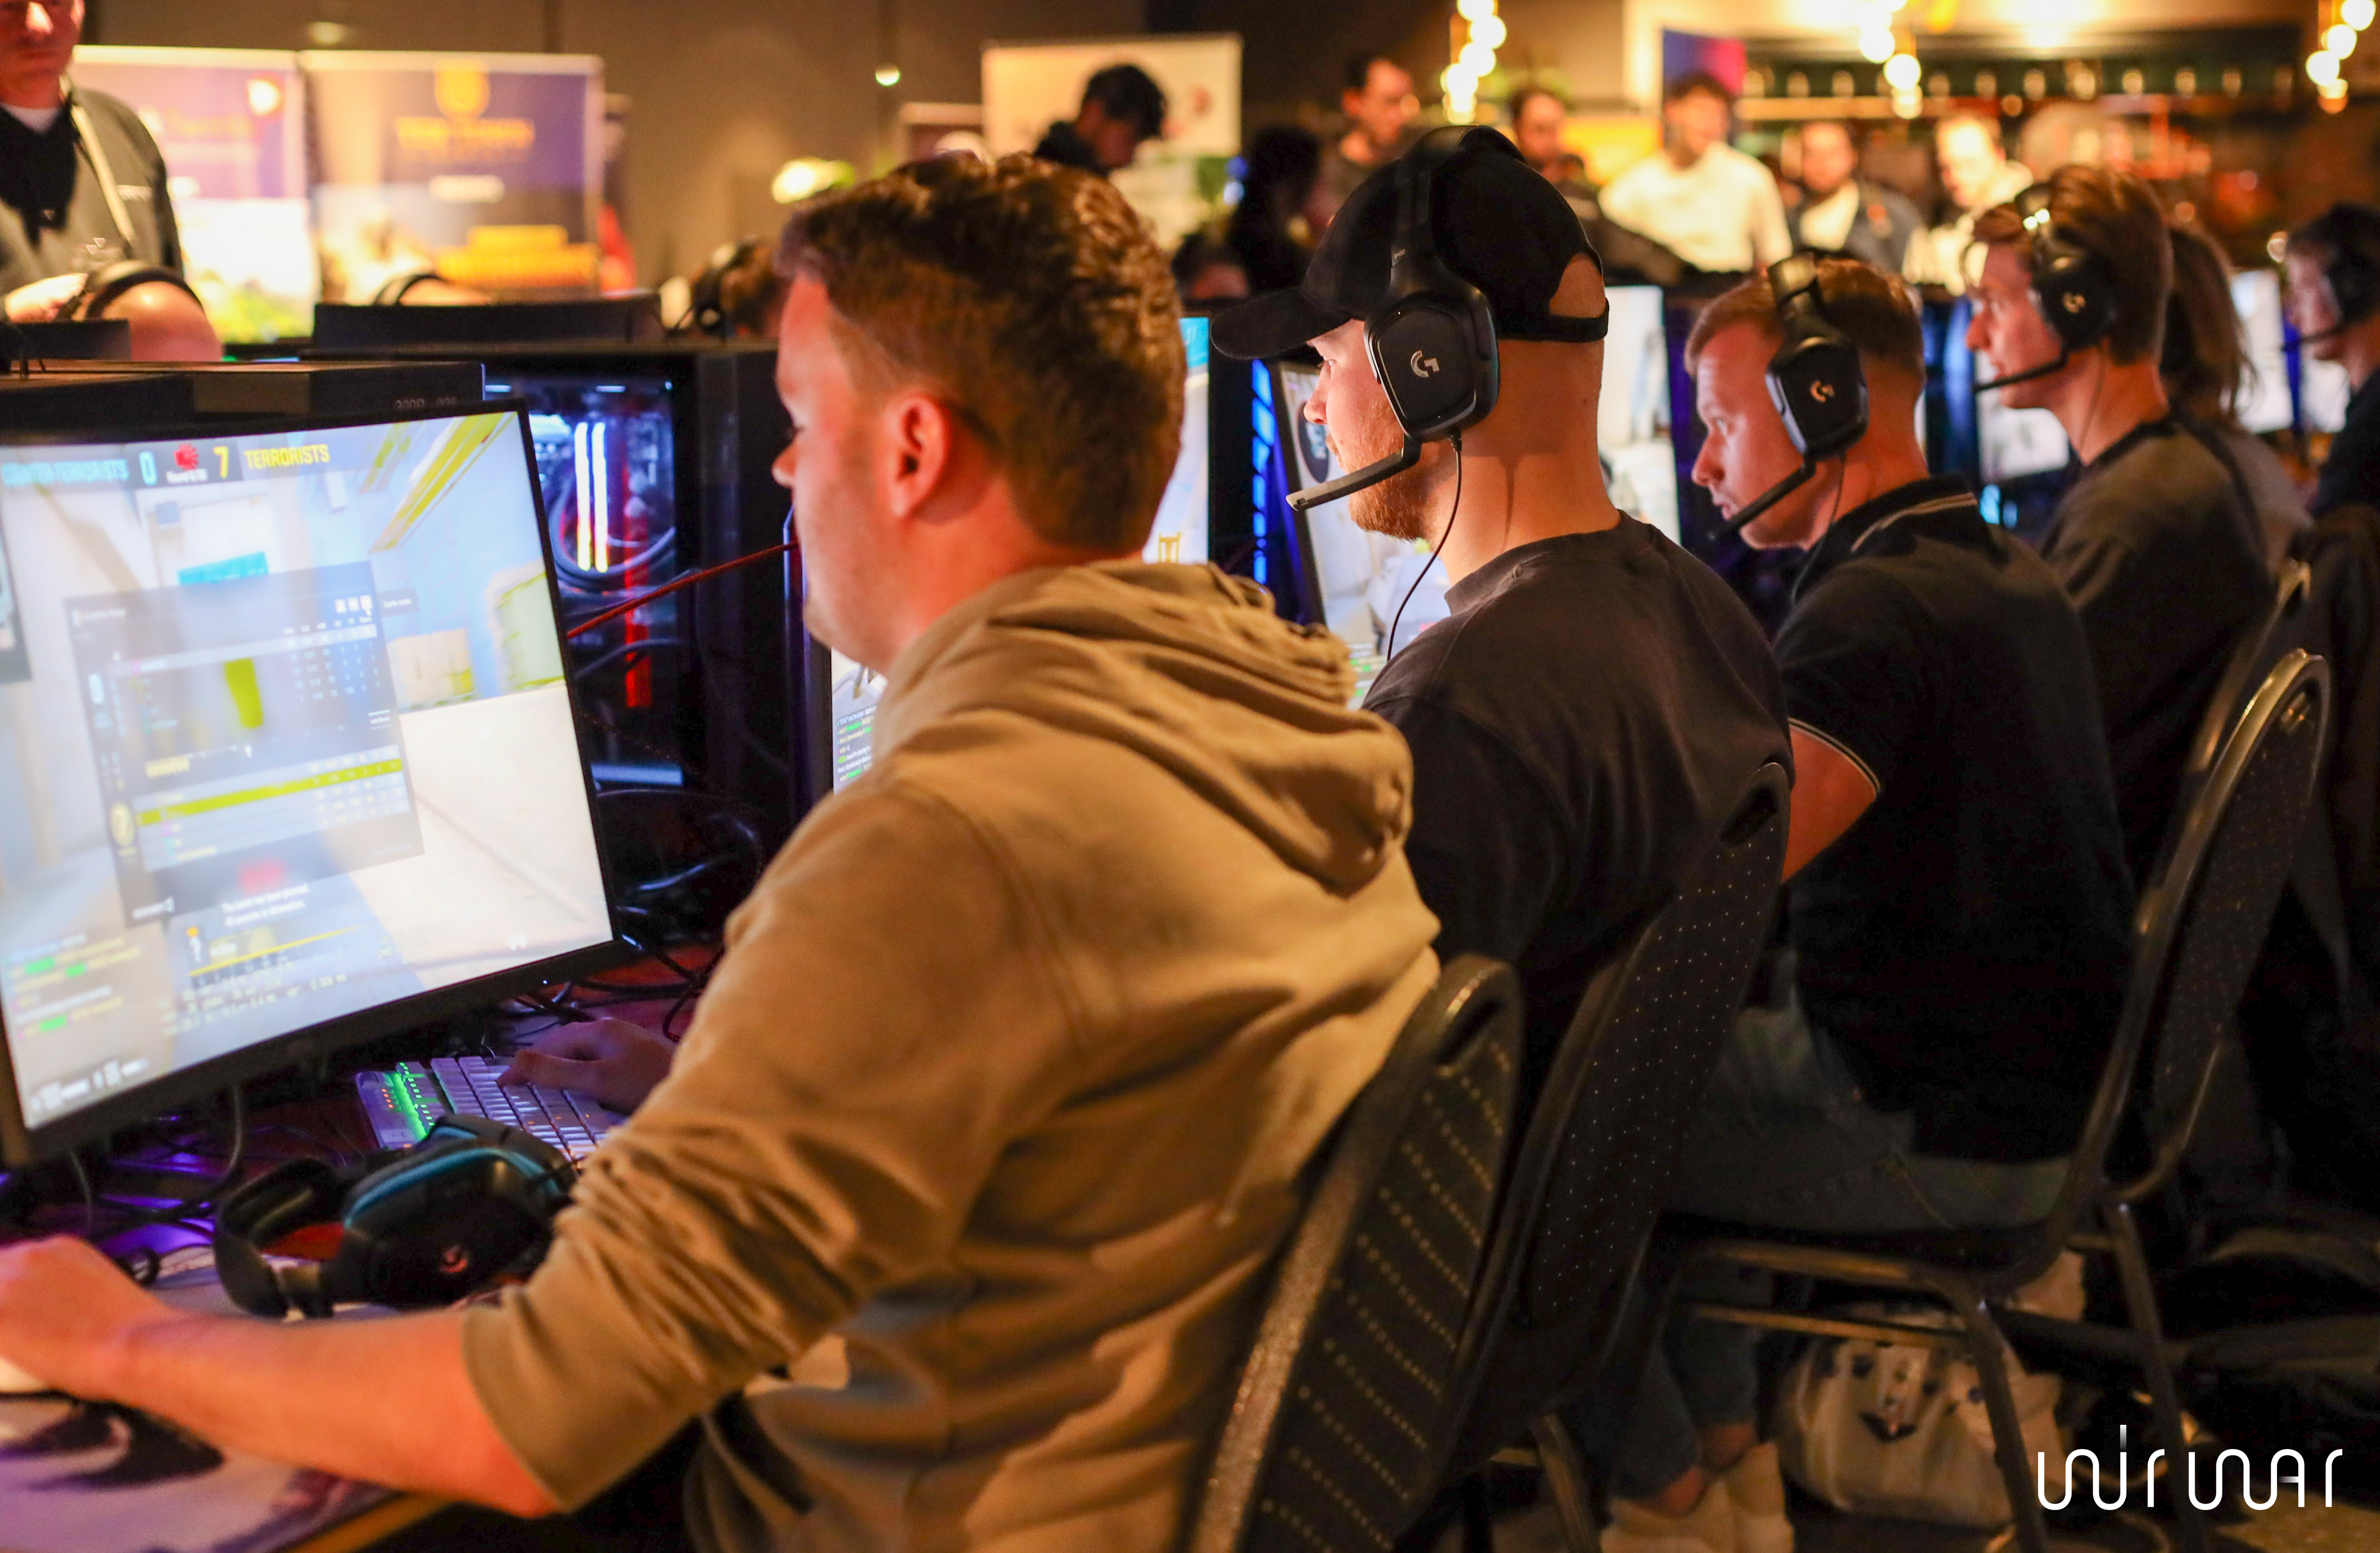 eSports Ladder links gamers to Twente's business community, launched at festival in Grolsch Veste